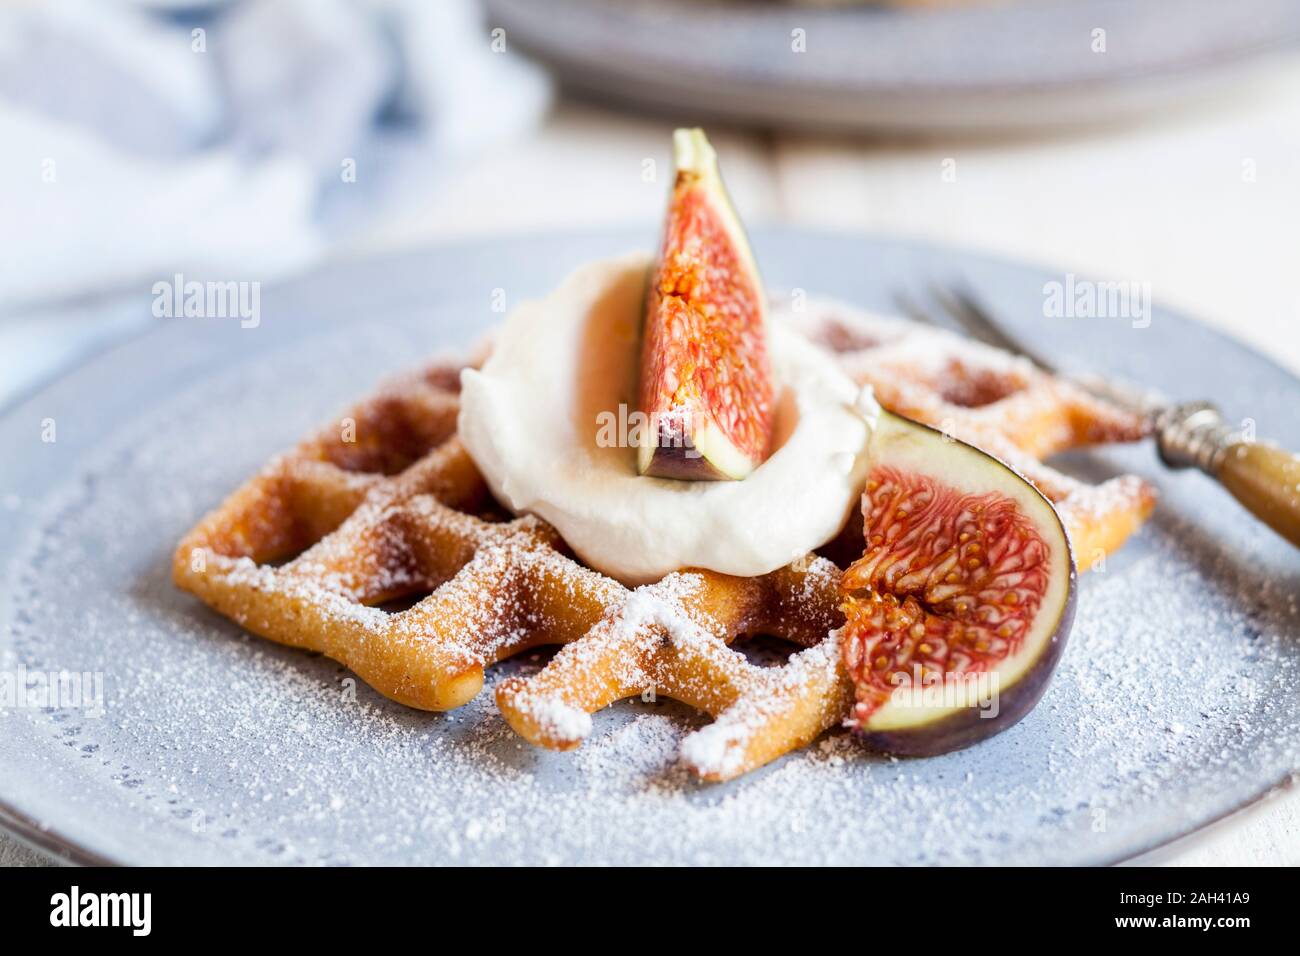 Thick Belgian waffle with whipped cream, powdered sugar and figs Stock Photo